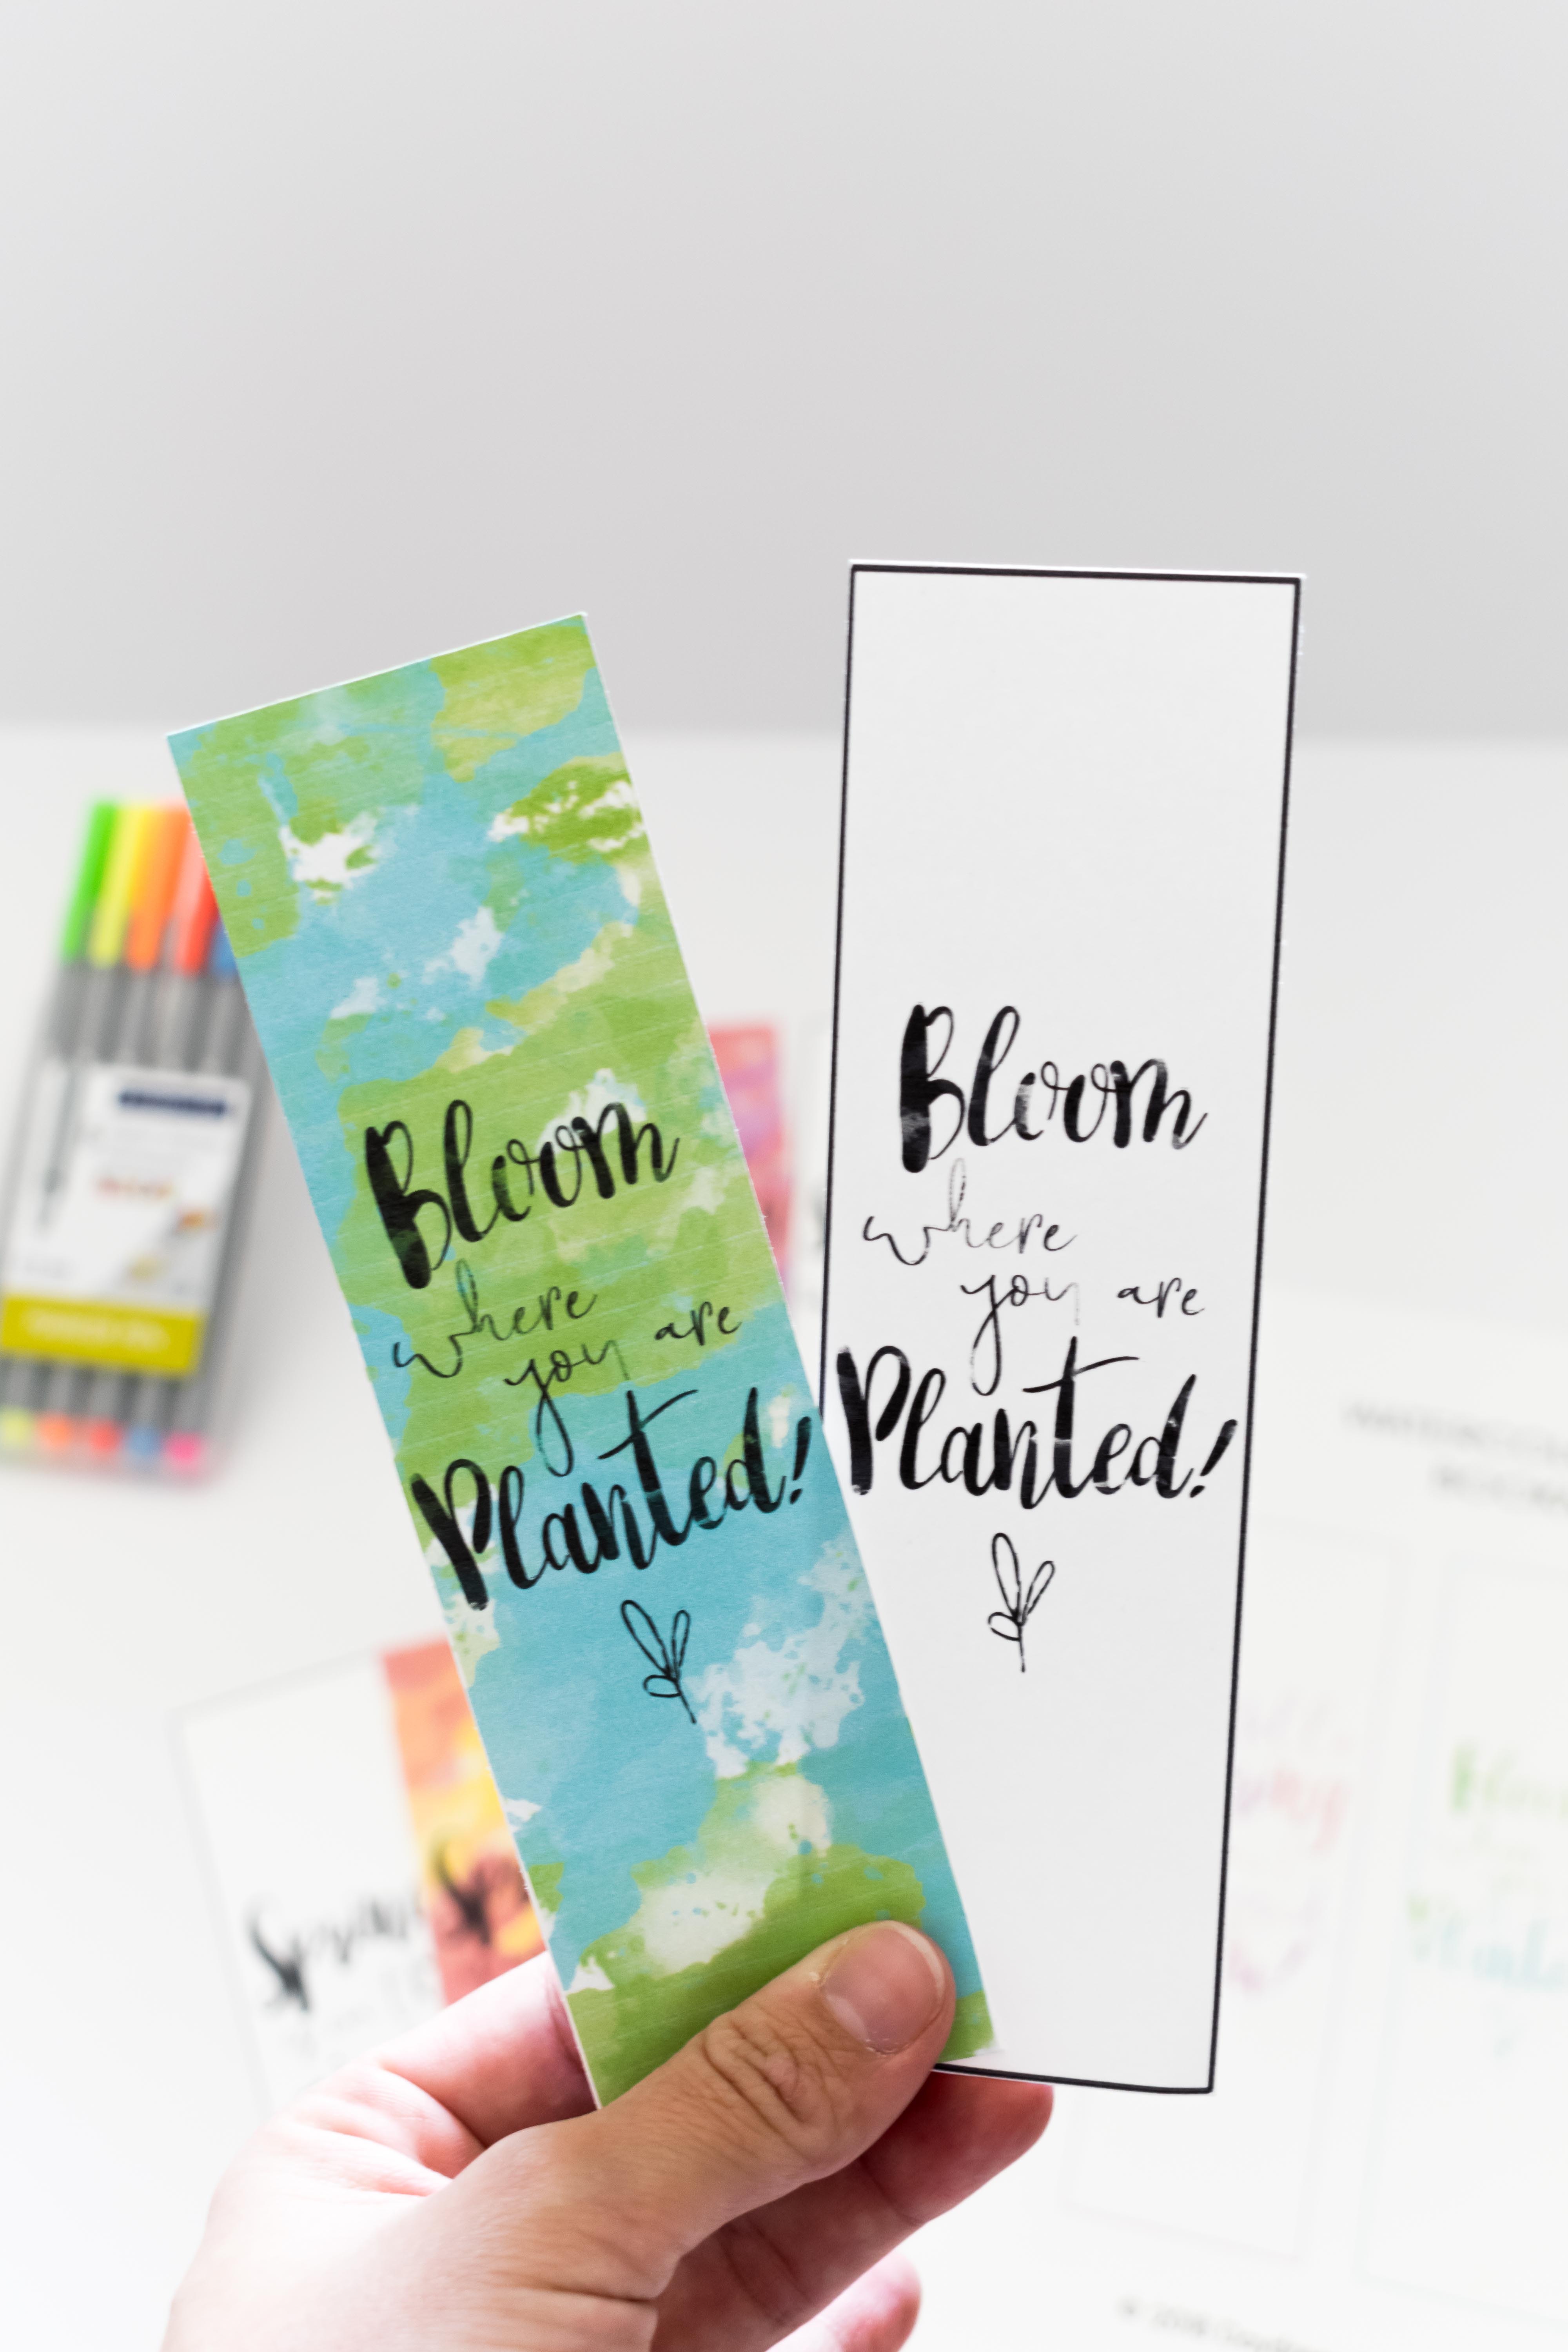 Hold on tight. These Watercolor Spring Bookmarks are absolutely beautiful! Use them for all of your books, or why not to give them to someone that loves reading and the spring season!!